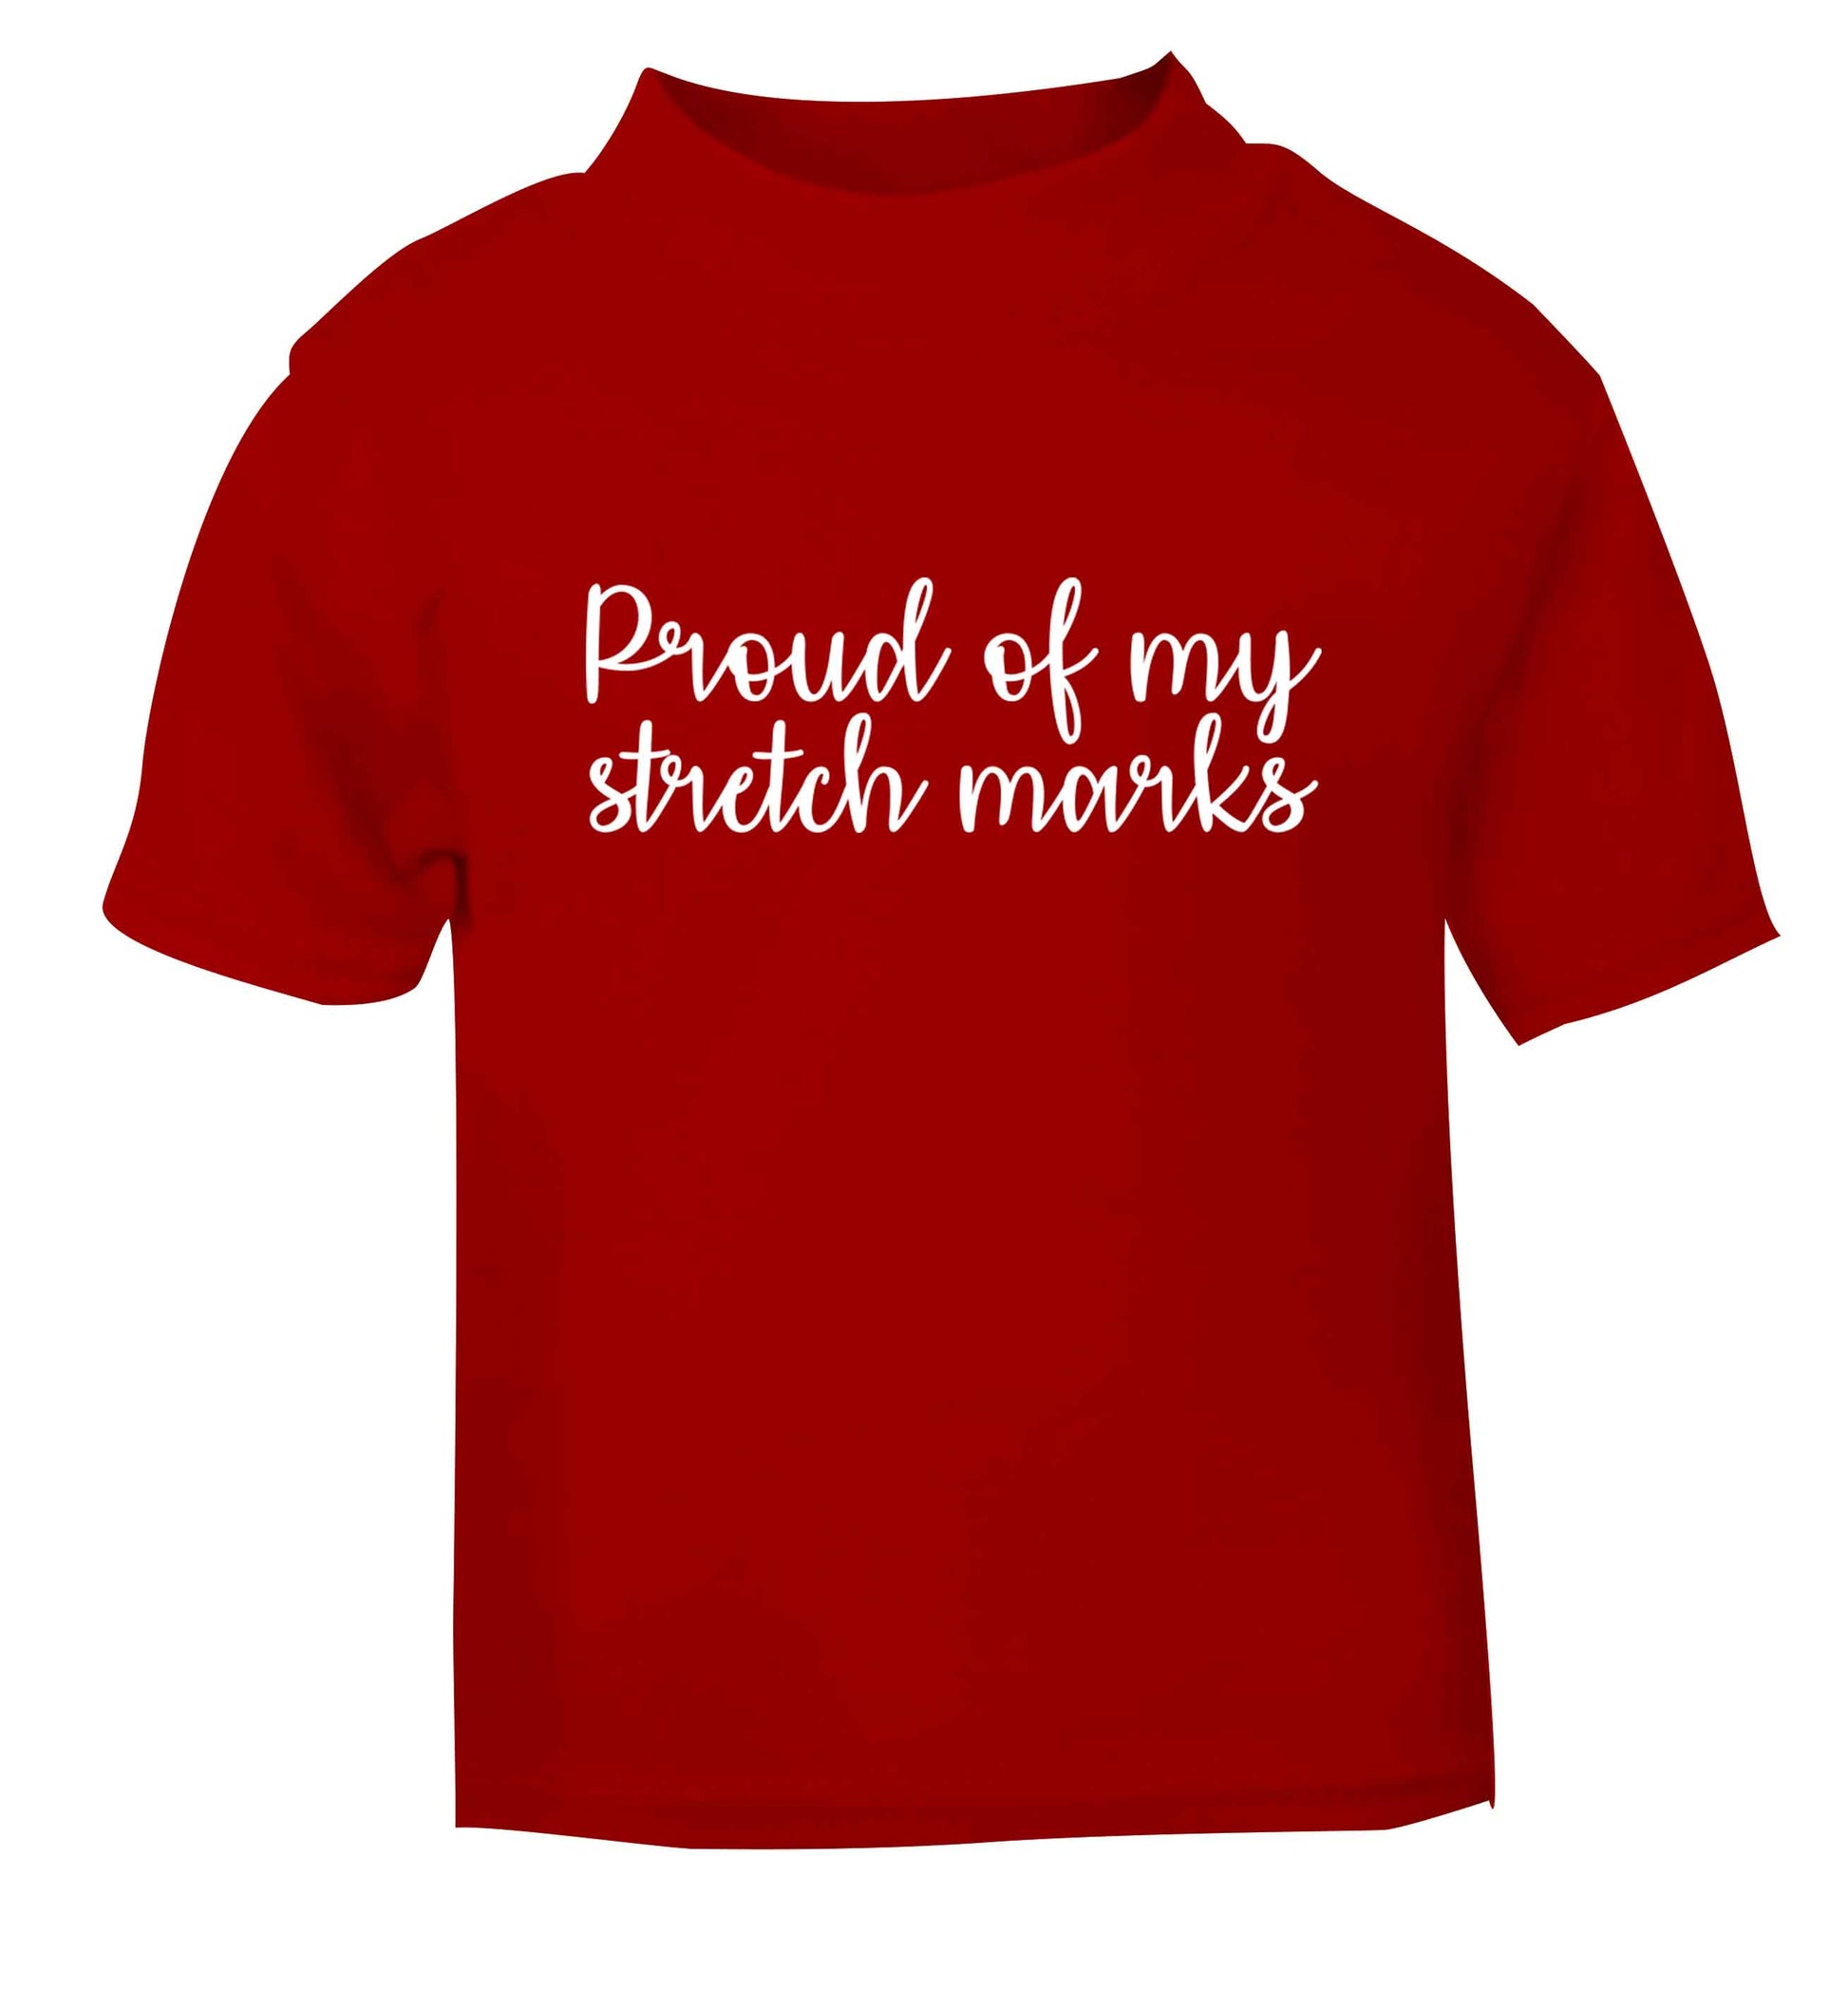 Proud of my stretch marks red baby toddler Tshirt 2 Years